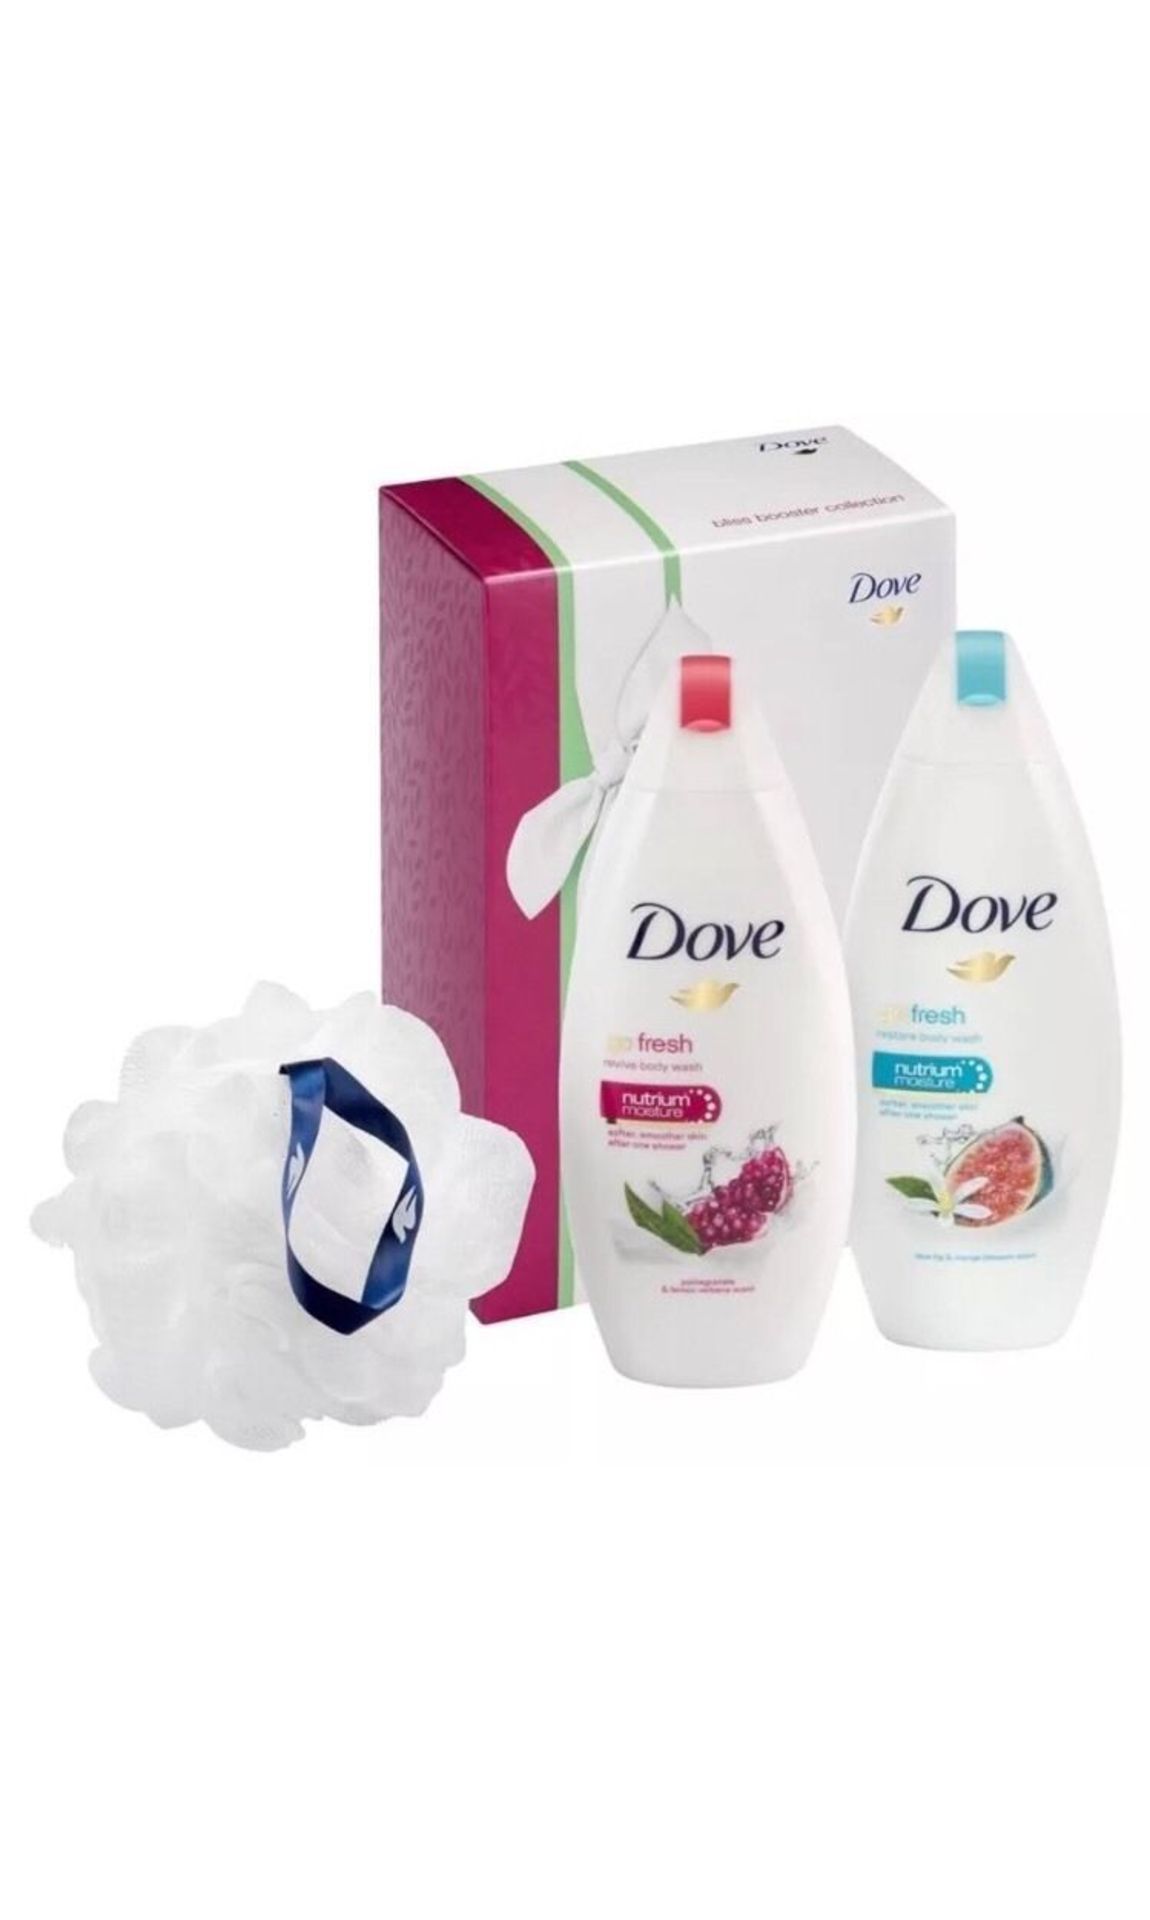 V *TRADE QTY* Brand New Dove Bliss Booster Gift Set Includes 1 x 250ml - ISP £7.99 X 3 YOUR BID